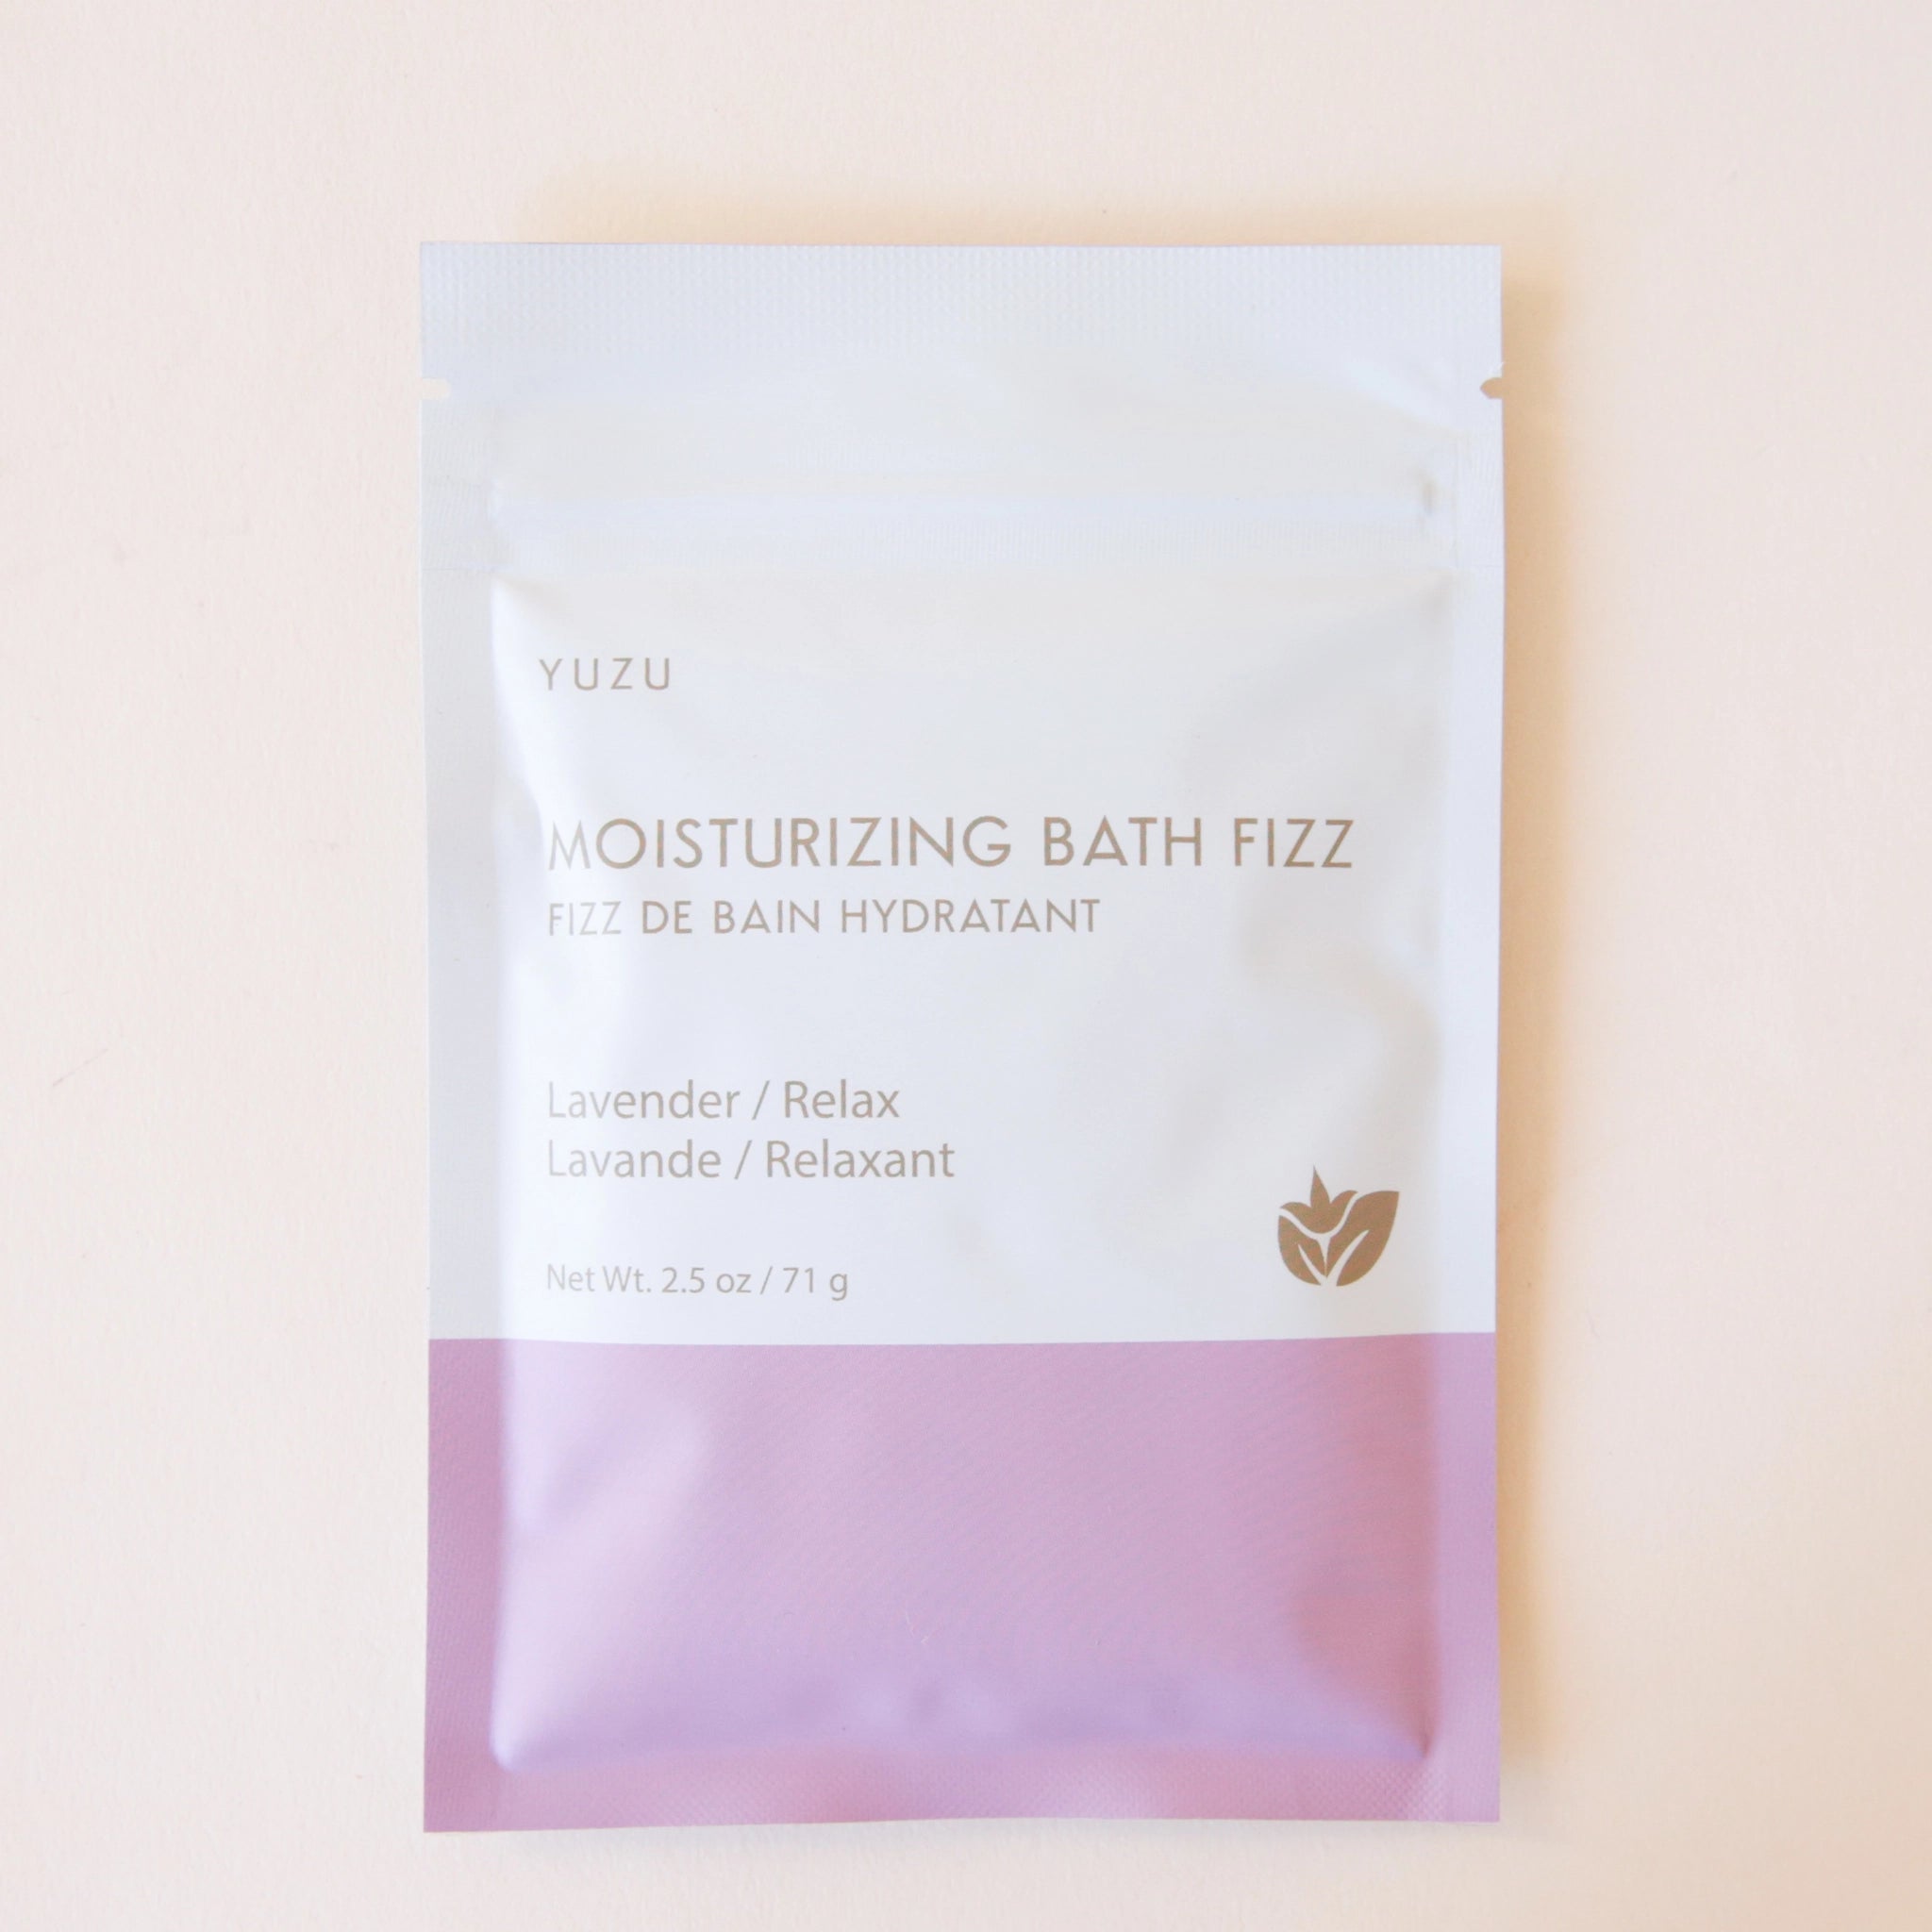 A packet of bath salts with the bottom half a light pink color and the top half white along with text on the front that reads, "Moisturizing Bath Fizz, Lavender / Relax".